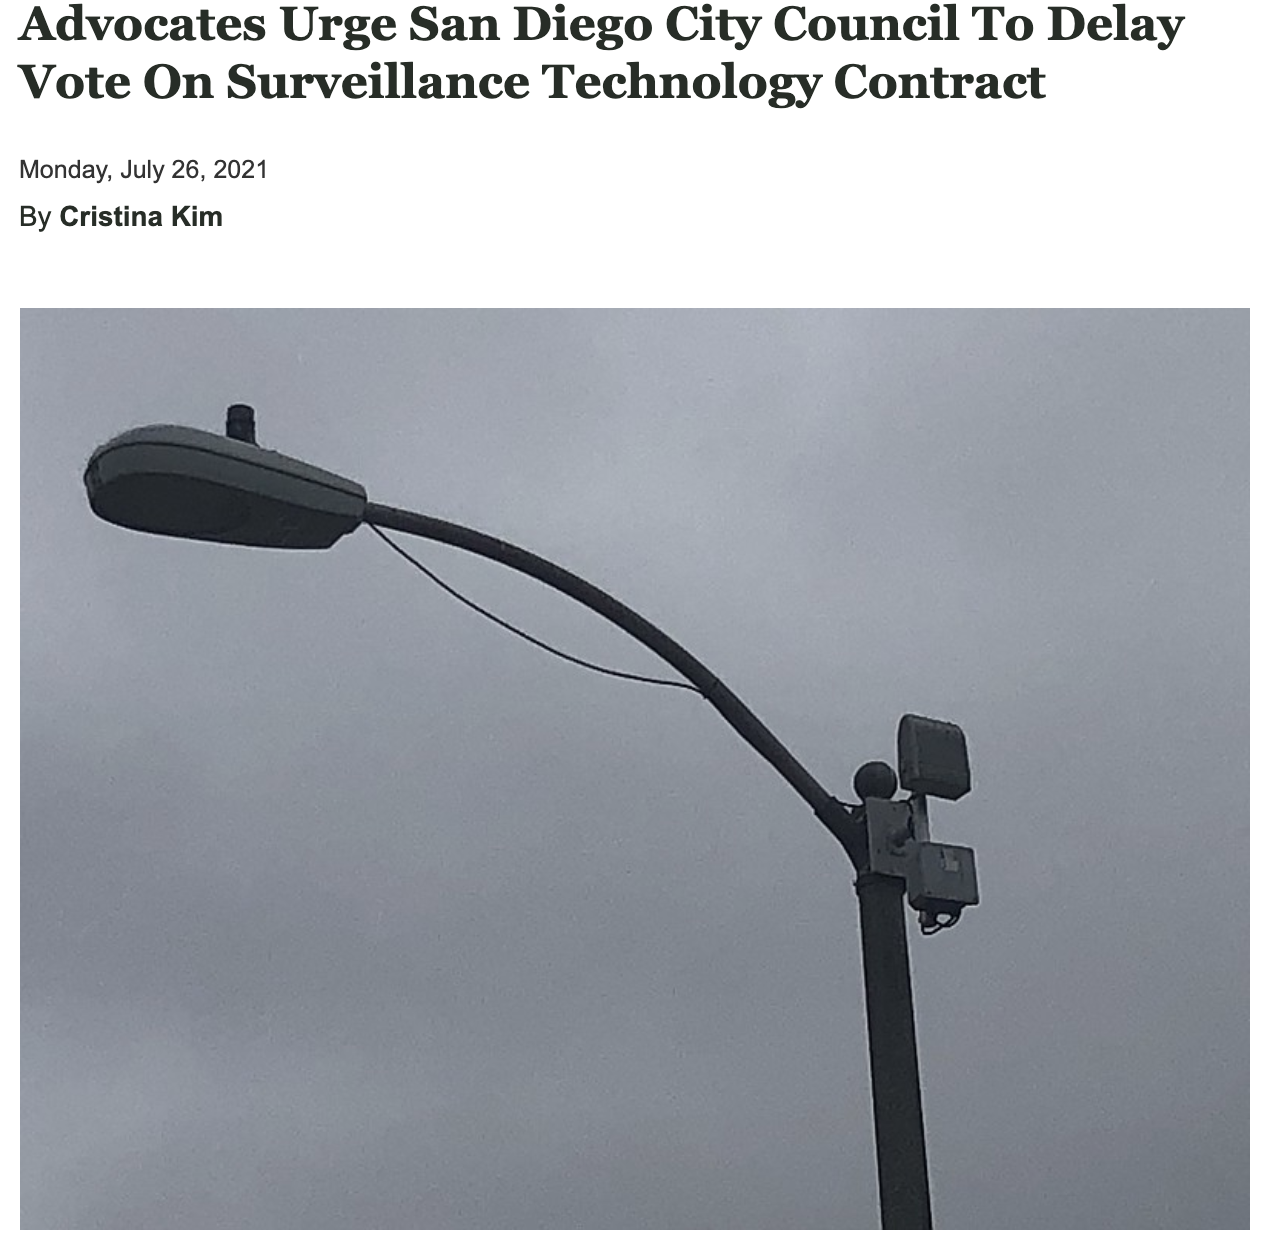 Advocates Urge San Diego City Council To Delay Vote On Surveillance Technology Contract